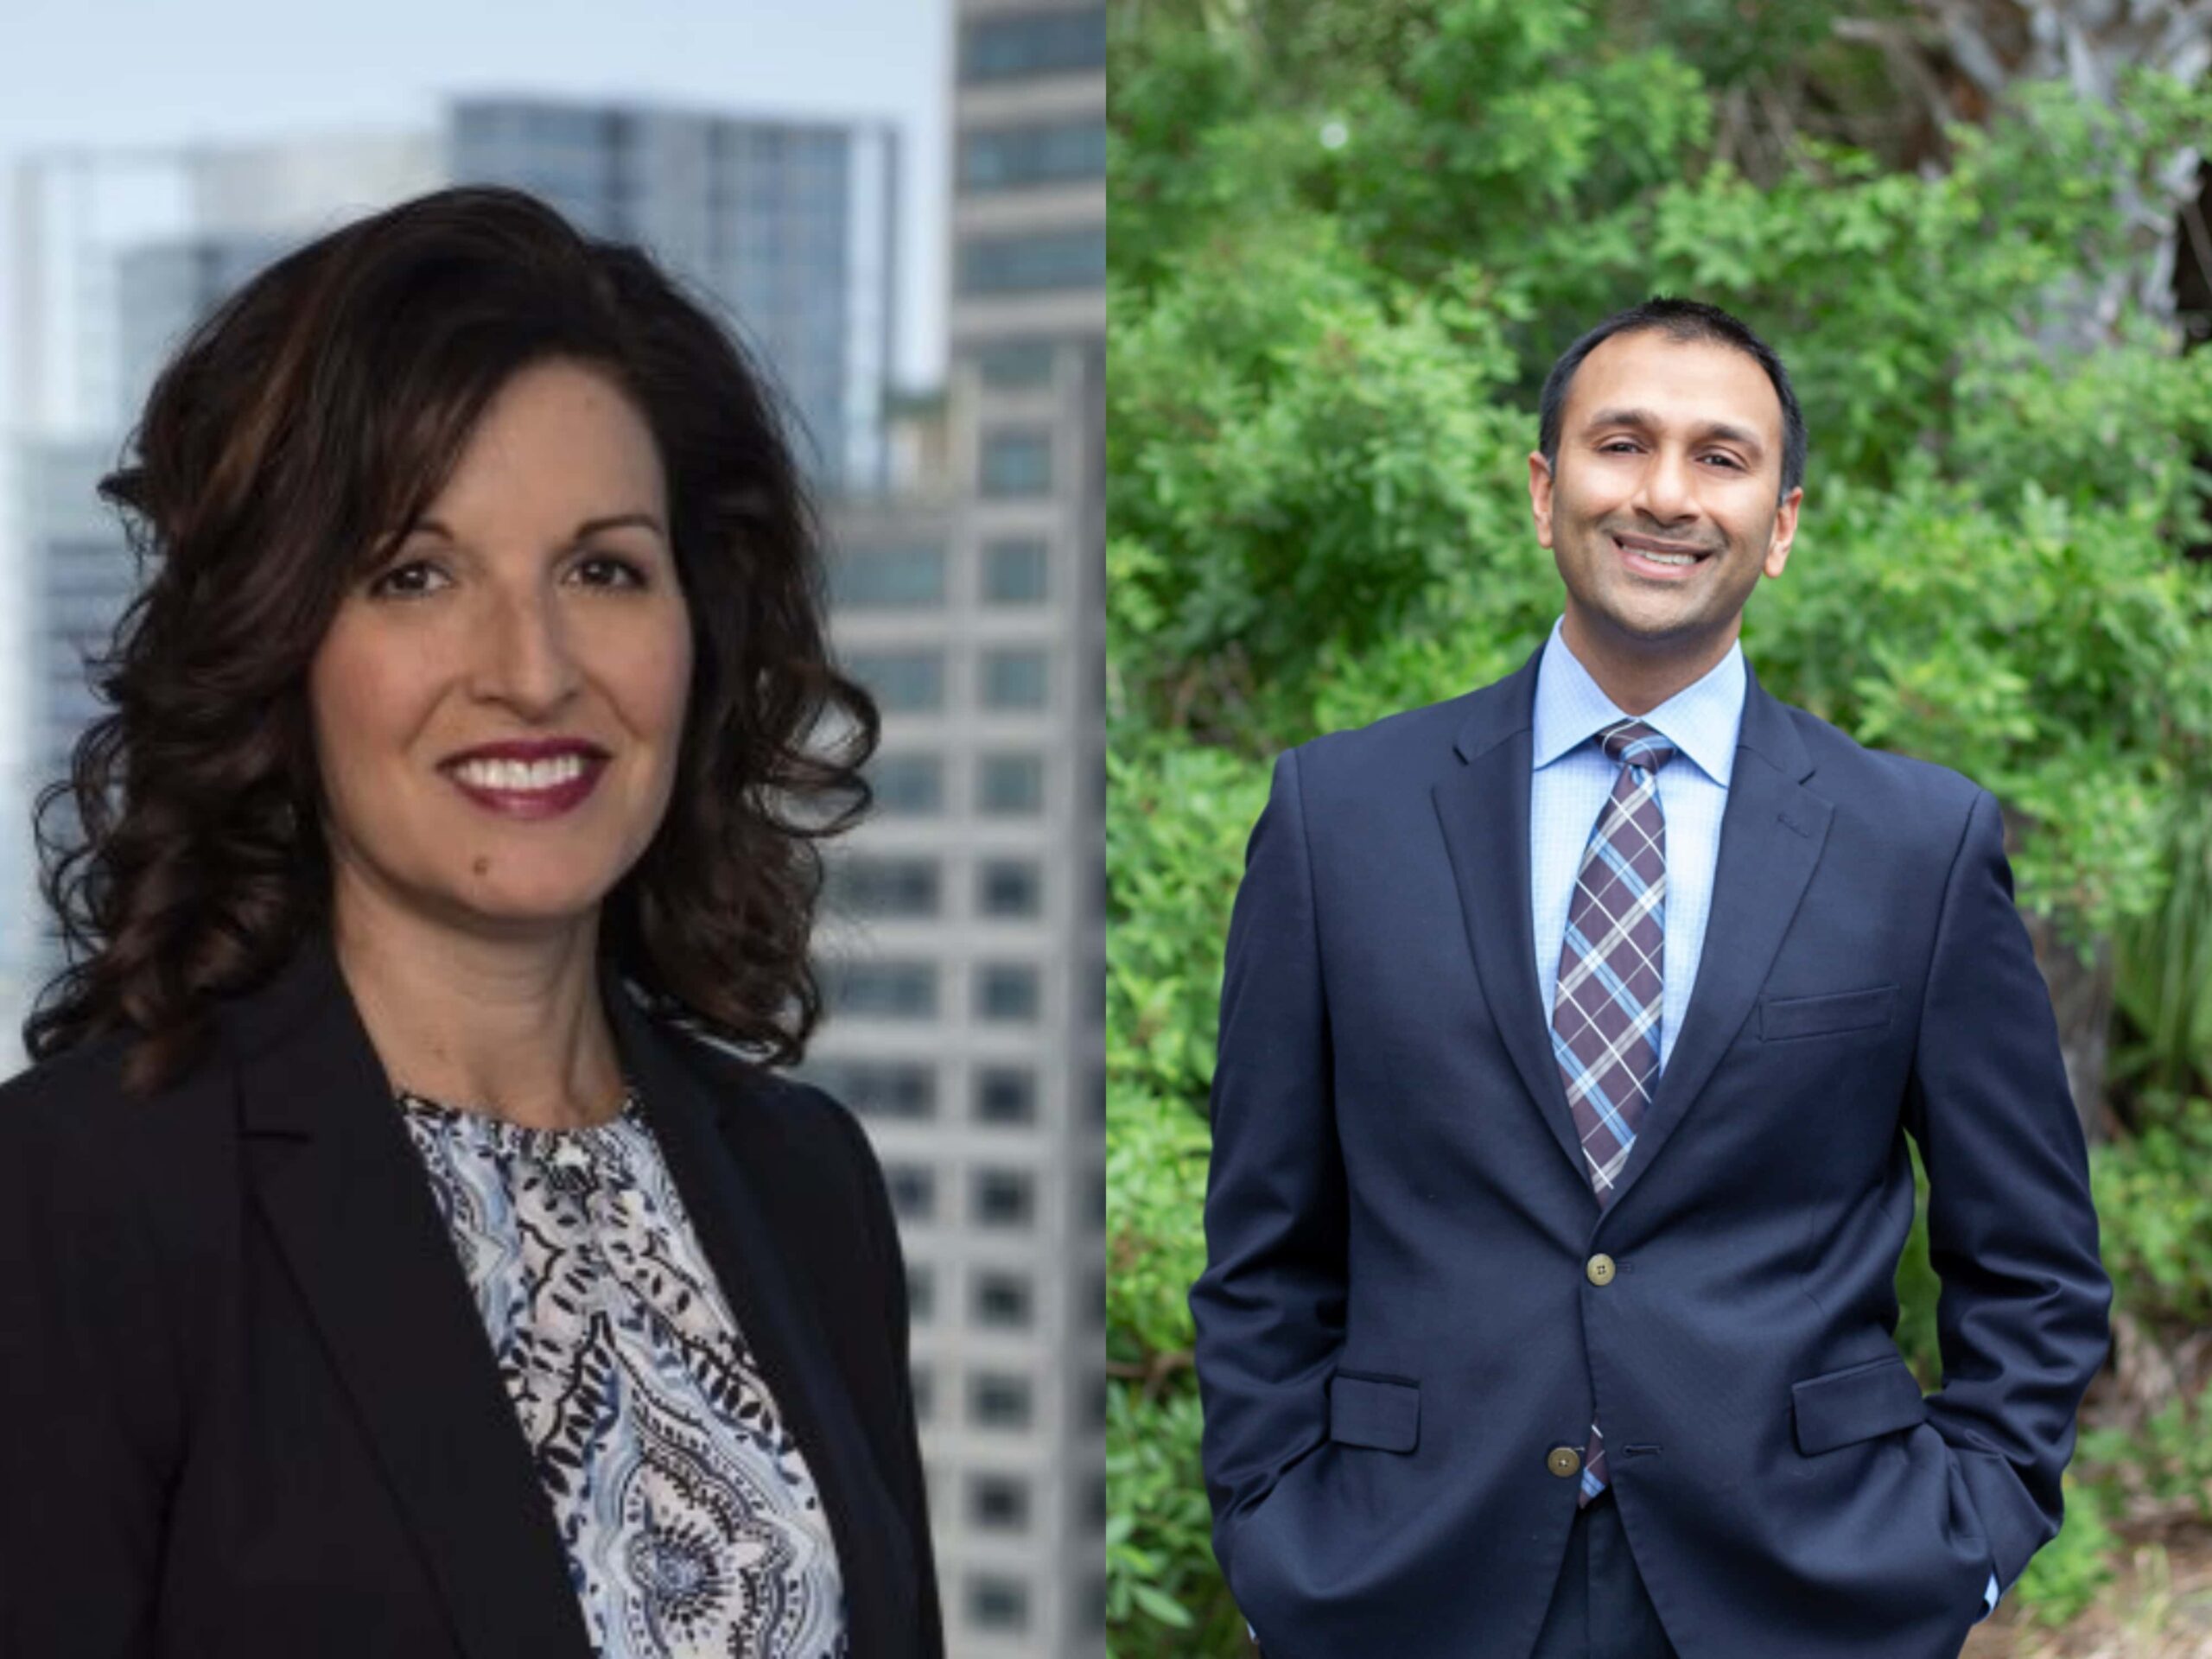 Melissa Seixas, Shilen Patel appointed to USF Board of Trustees